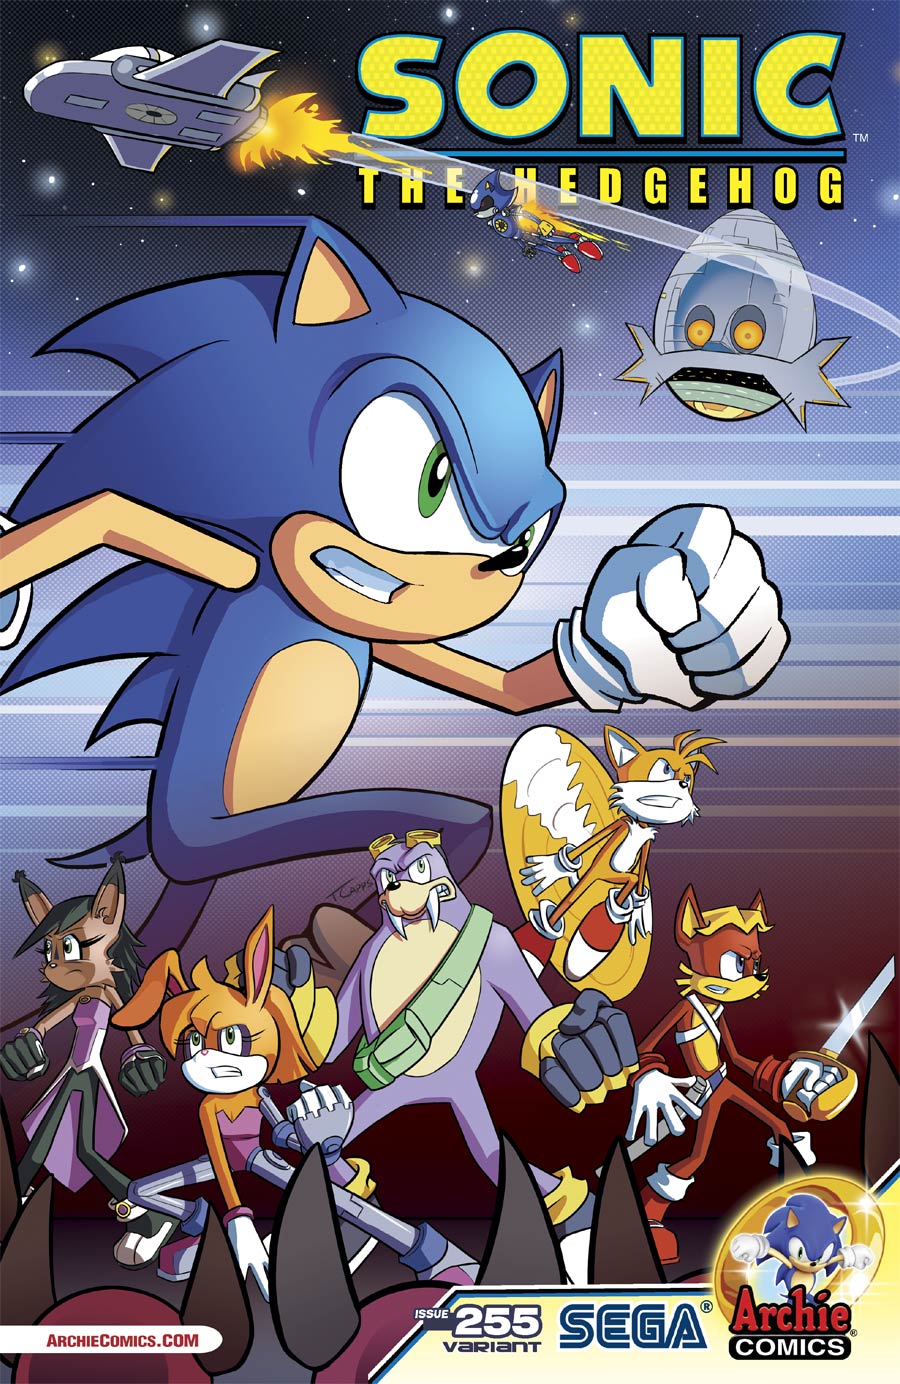 Sonic The Hedgehog Vol 2 #255 Cover B Variant Freedom Fighter Cover